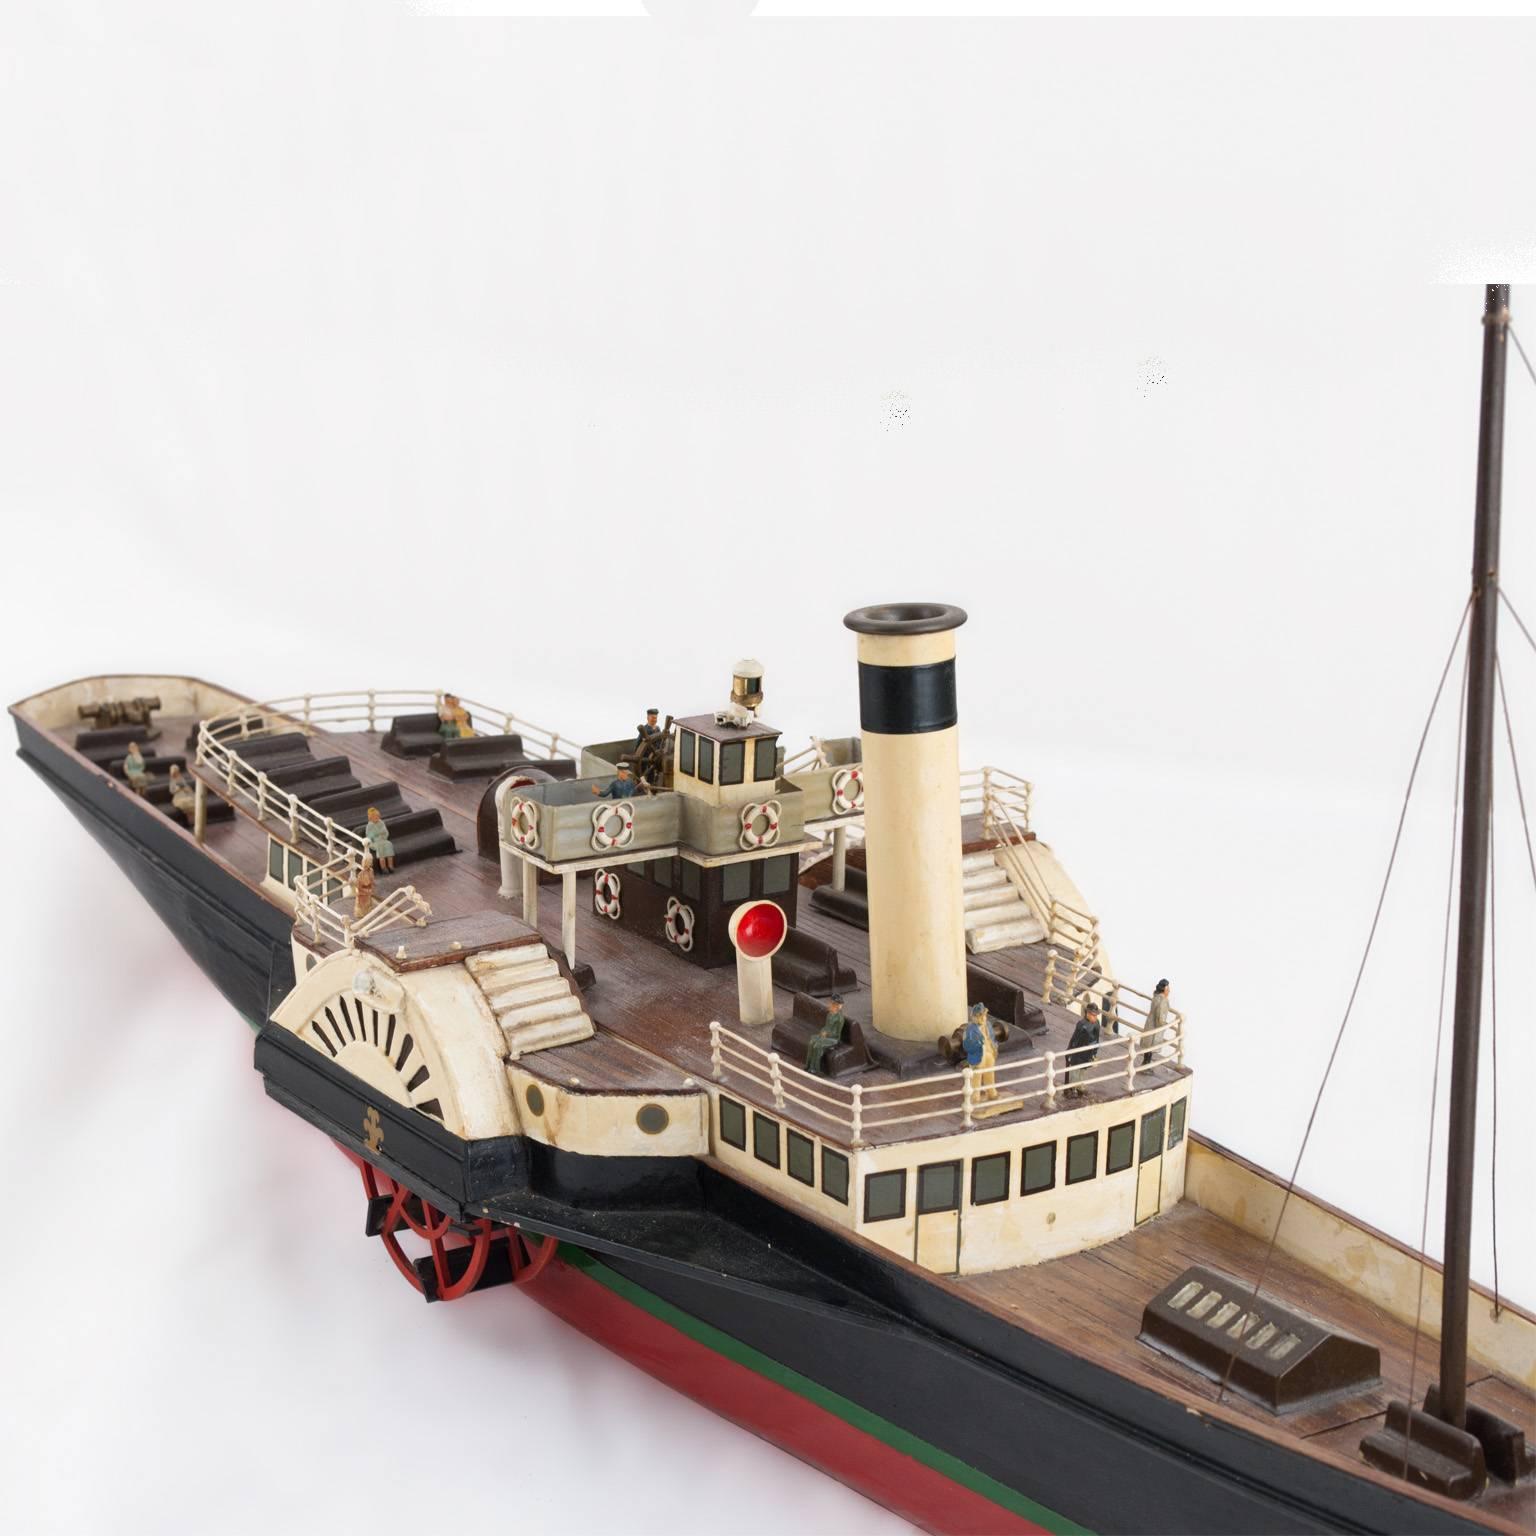 A vintage, detailed model of a side wheeler steam boat powered by a steam engine that drives peddle wheels to propel the craft through the water. This models was made in Bakelite. Handcrafted wooden model boat fully assembled, circa 1910,